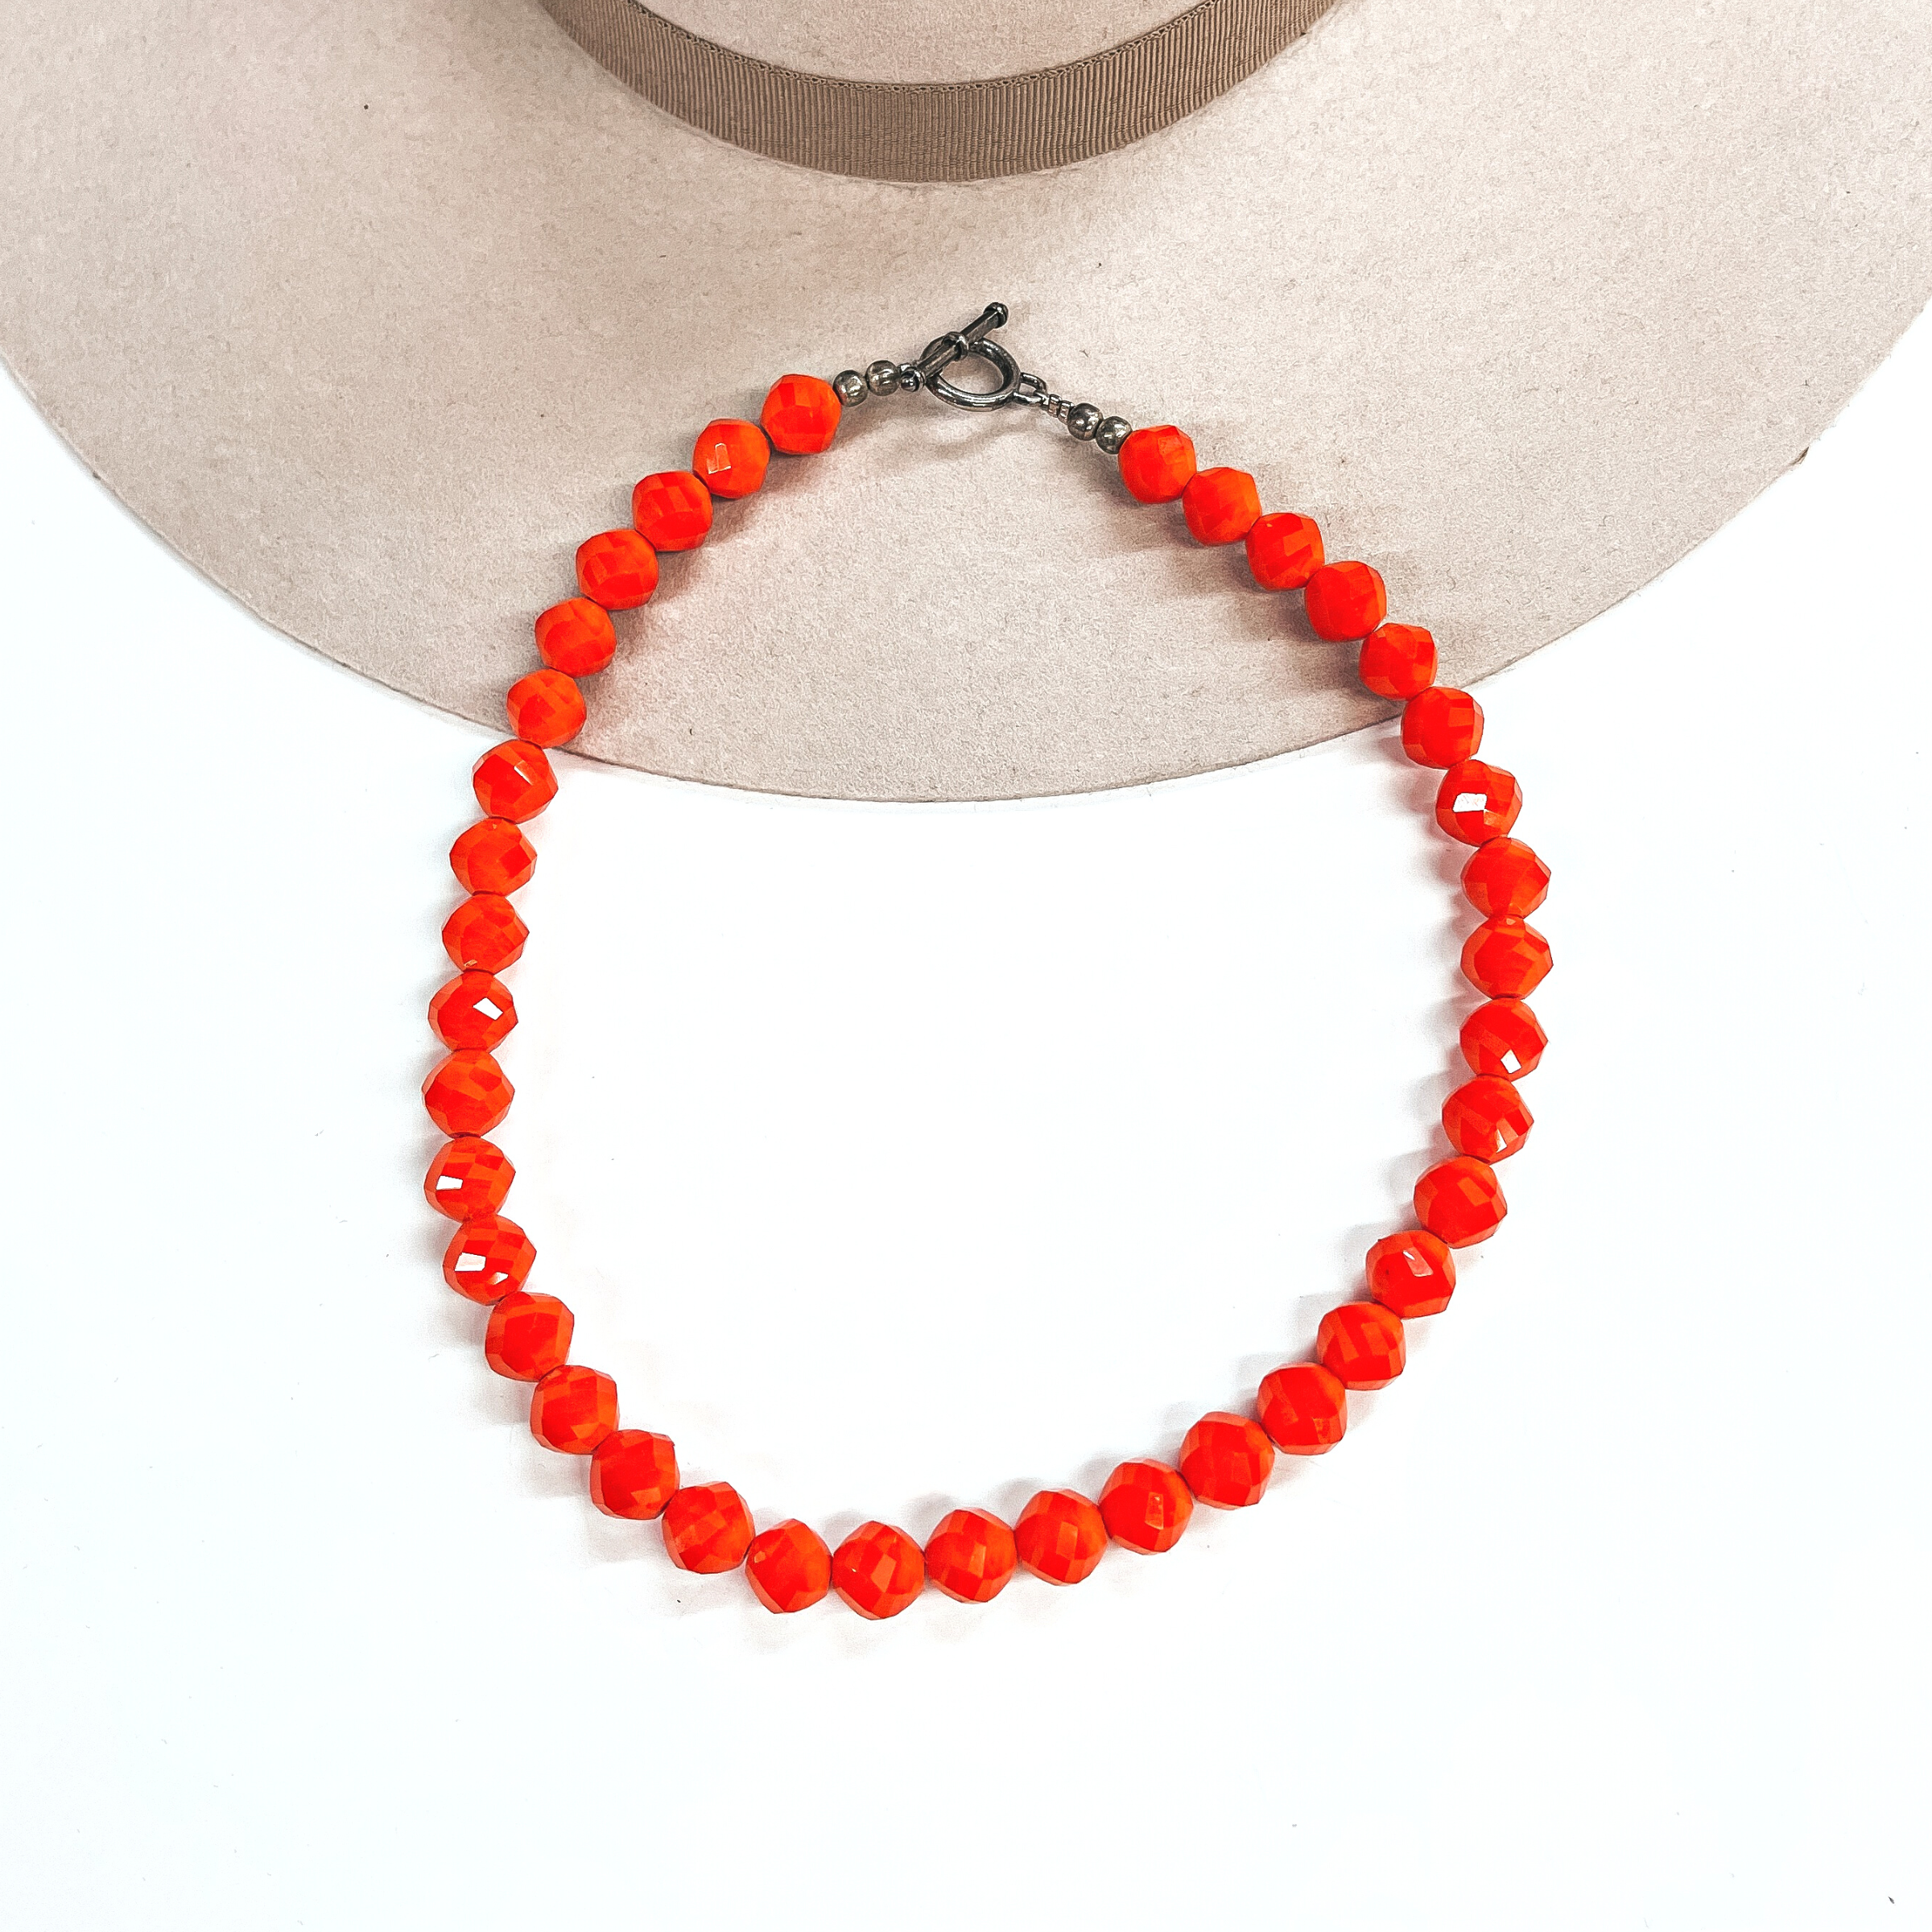 Fun Crystal Necklaces Handstrung at GUG in Orange and Red | ONLY 1 LEFT! - Giddy Up Glamour Boutique